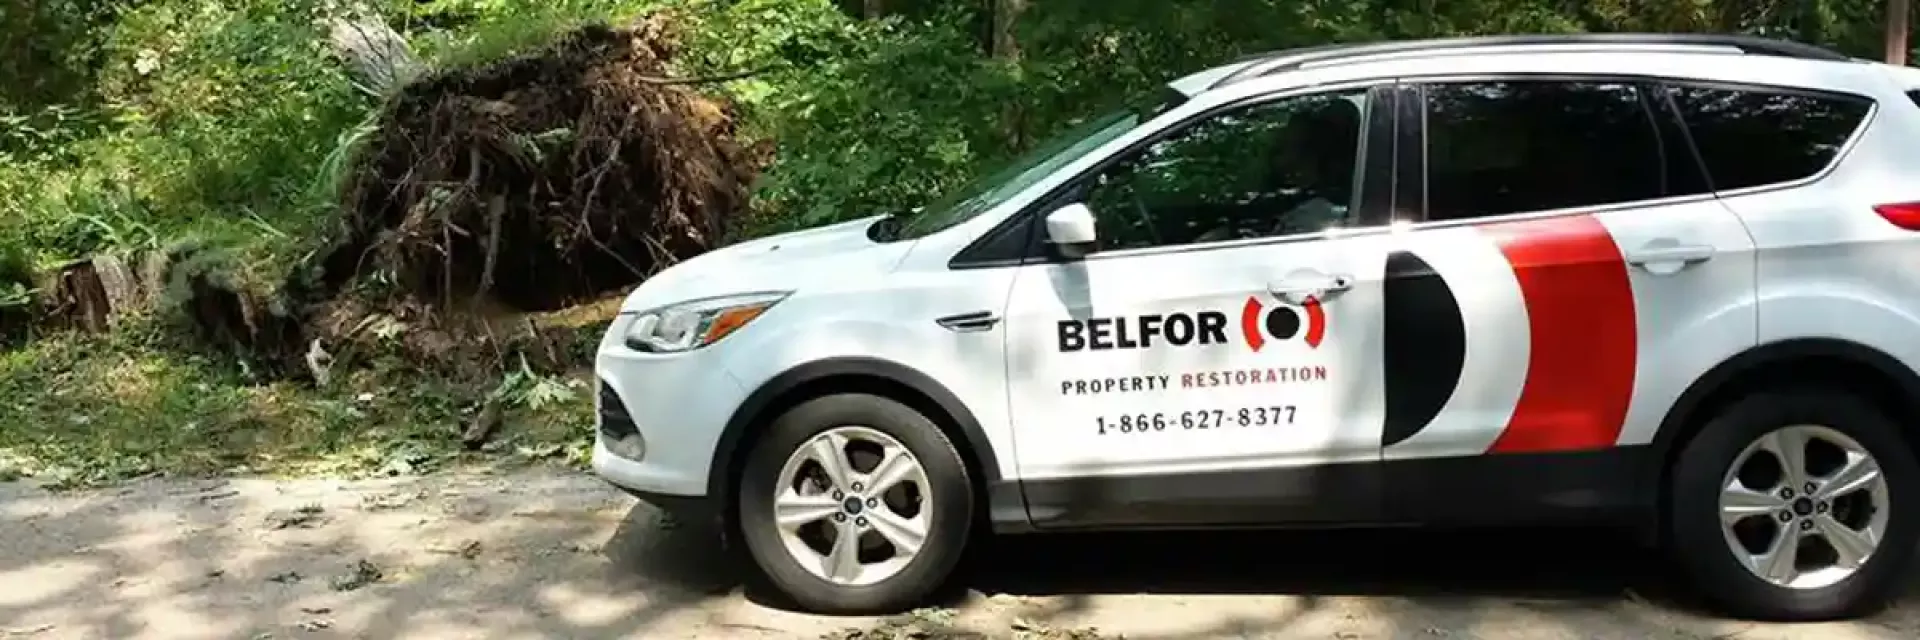 BELFOR Canada with fallen tree after storm